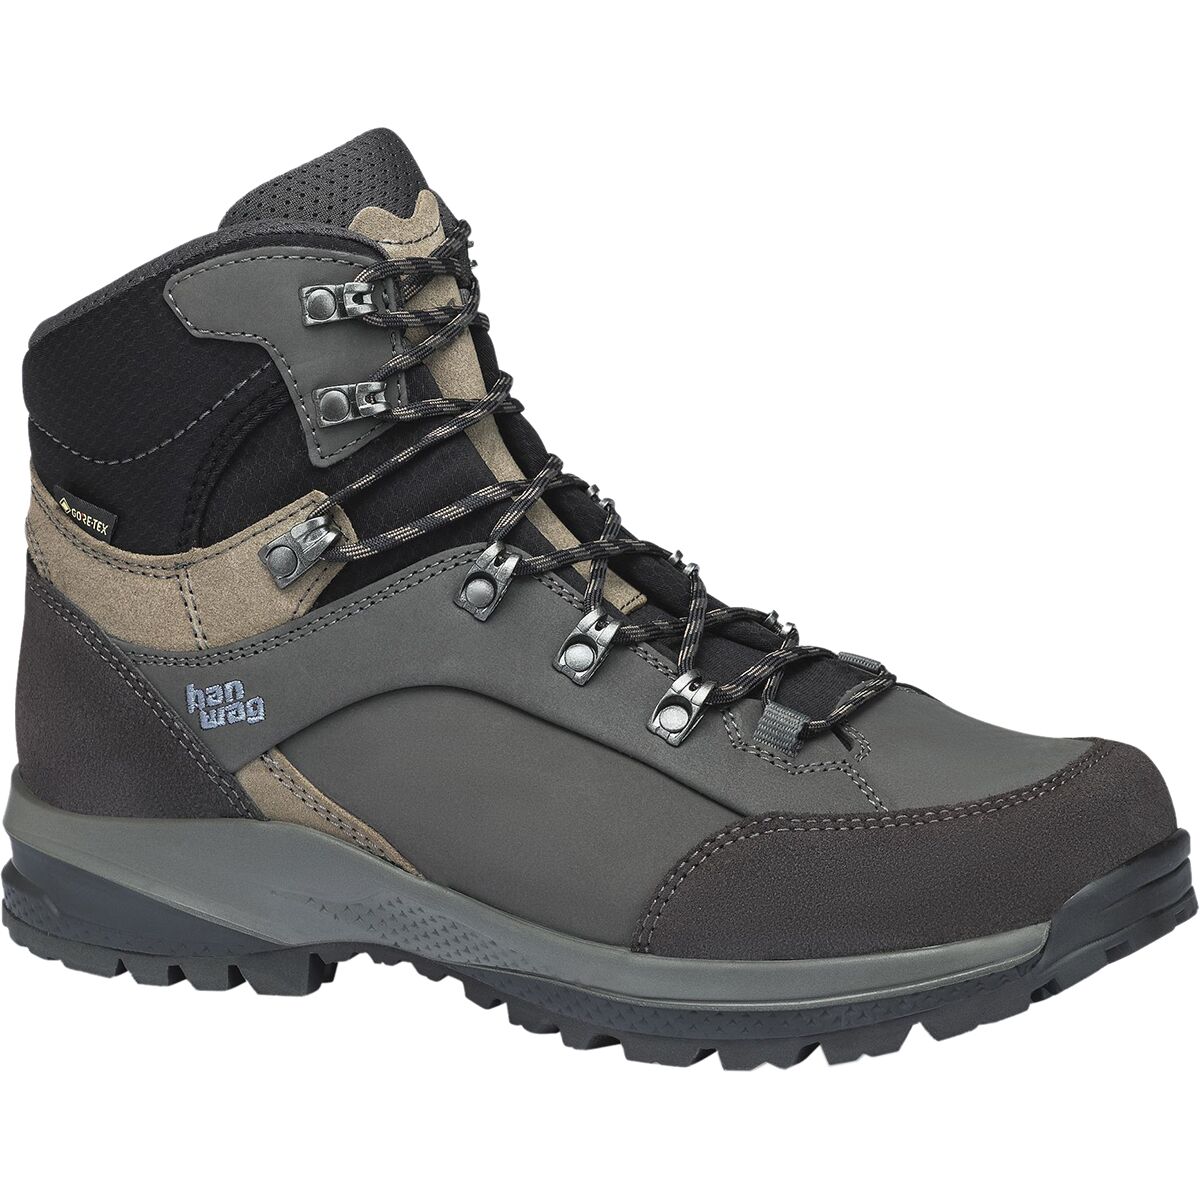 Hanwag Banks SF Extra GTX Backpacking Boot - Men's